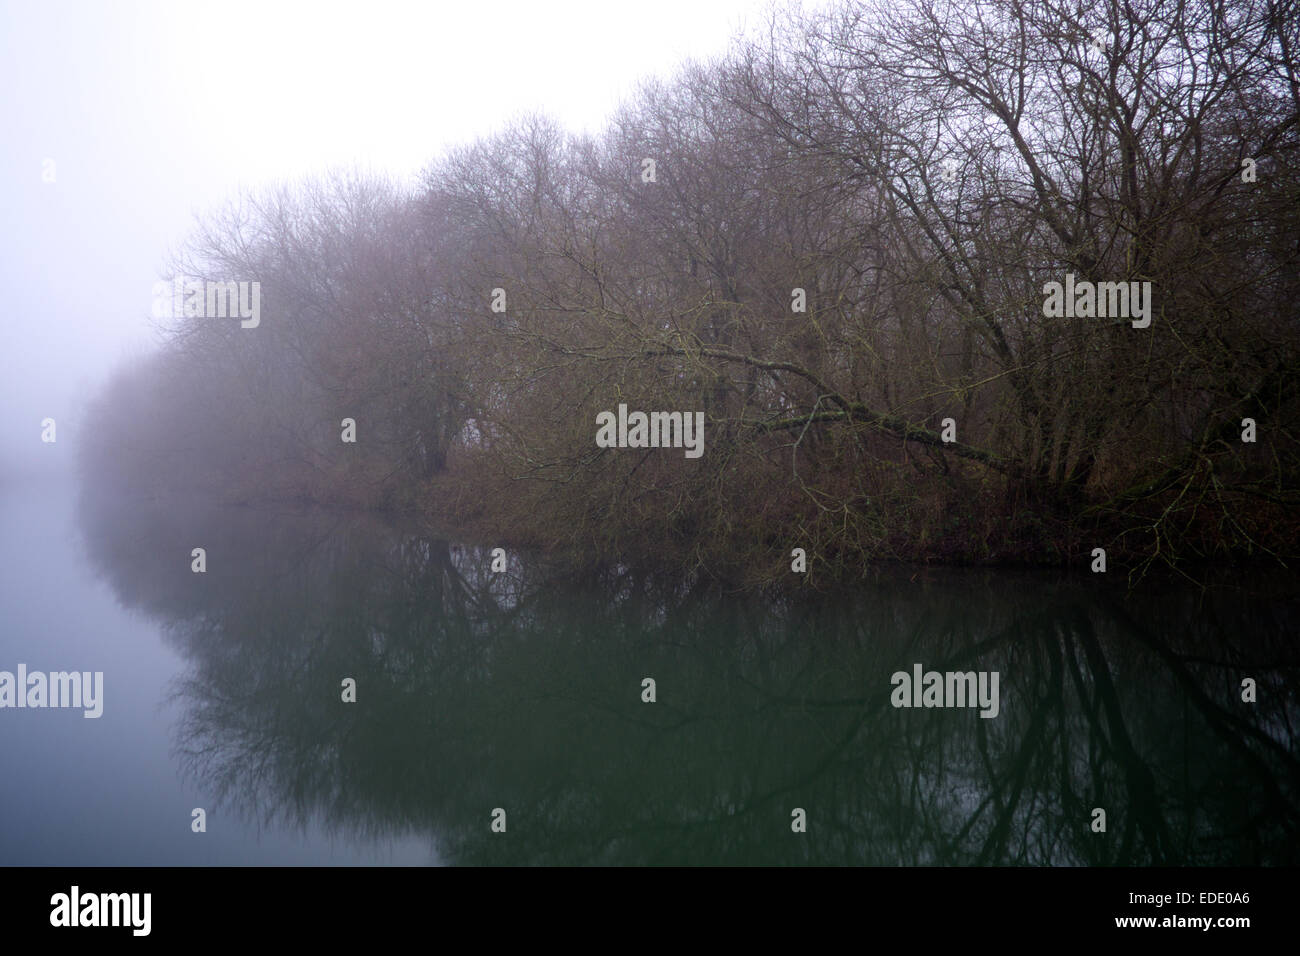 Trees along canal reflecting in water Stock Photo